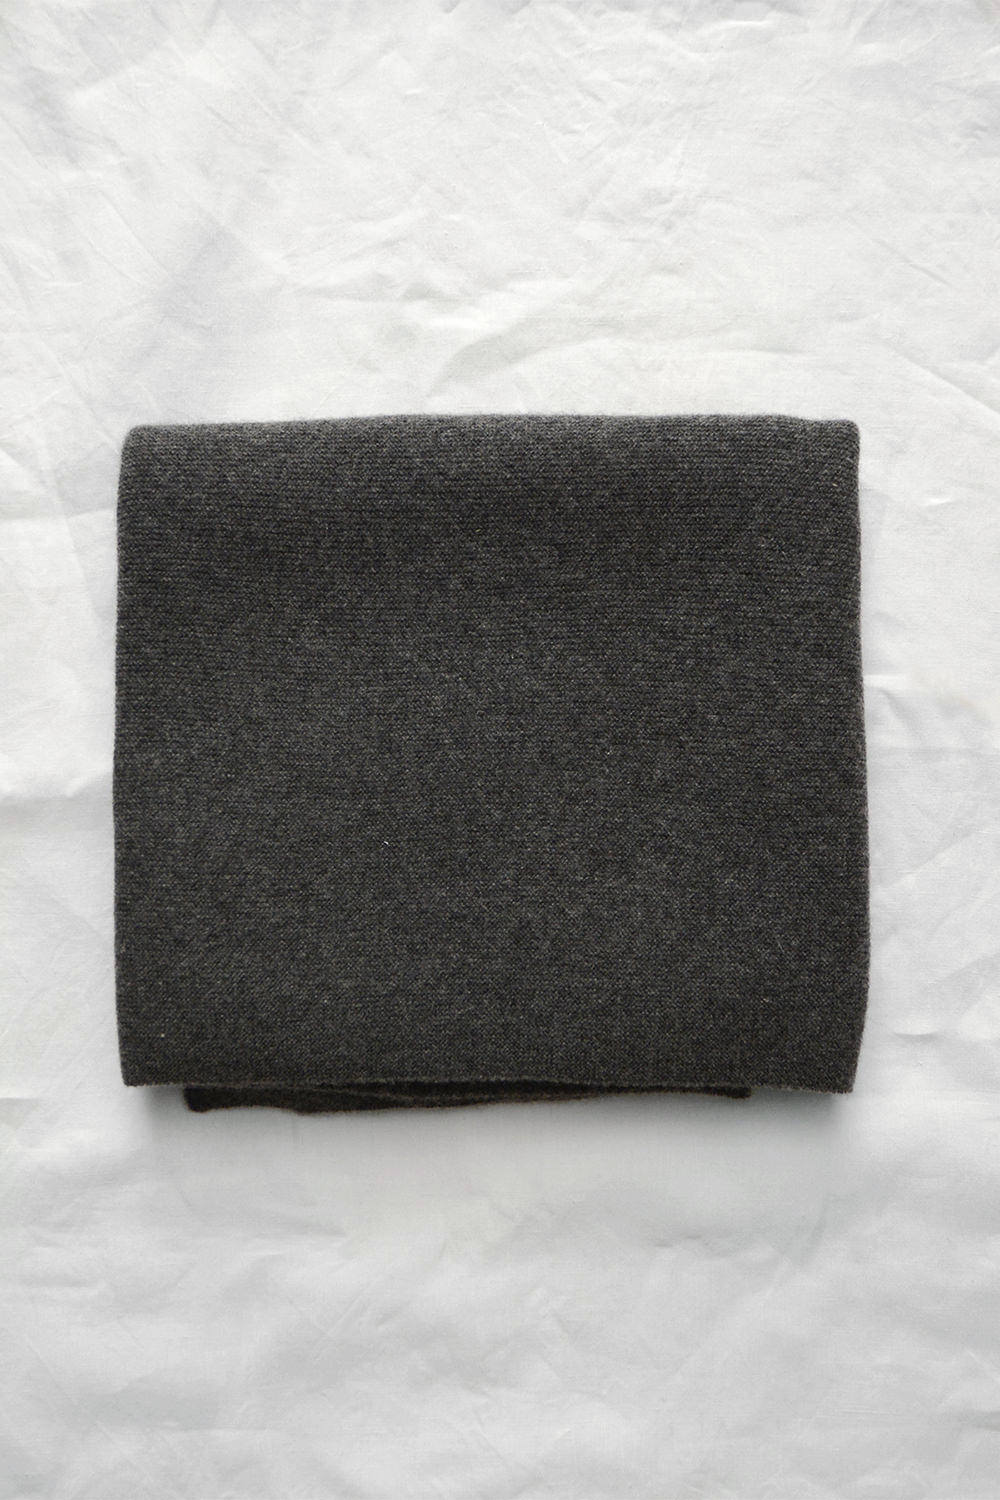 high quality cashmere baby blanket